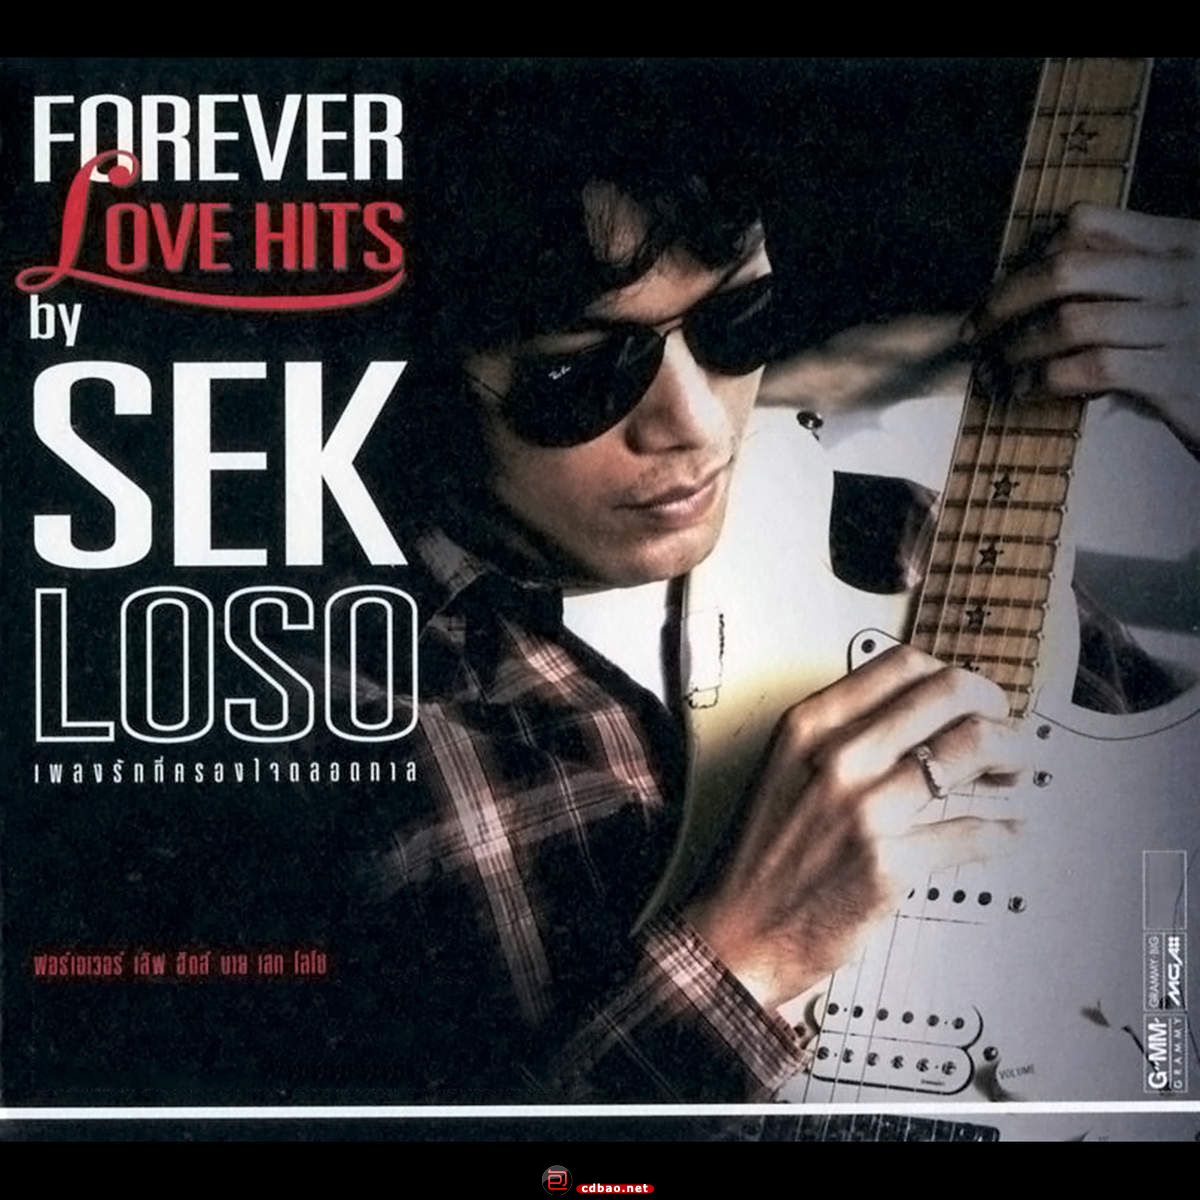 Forever Love Hits By Sek Loso.jpeg